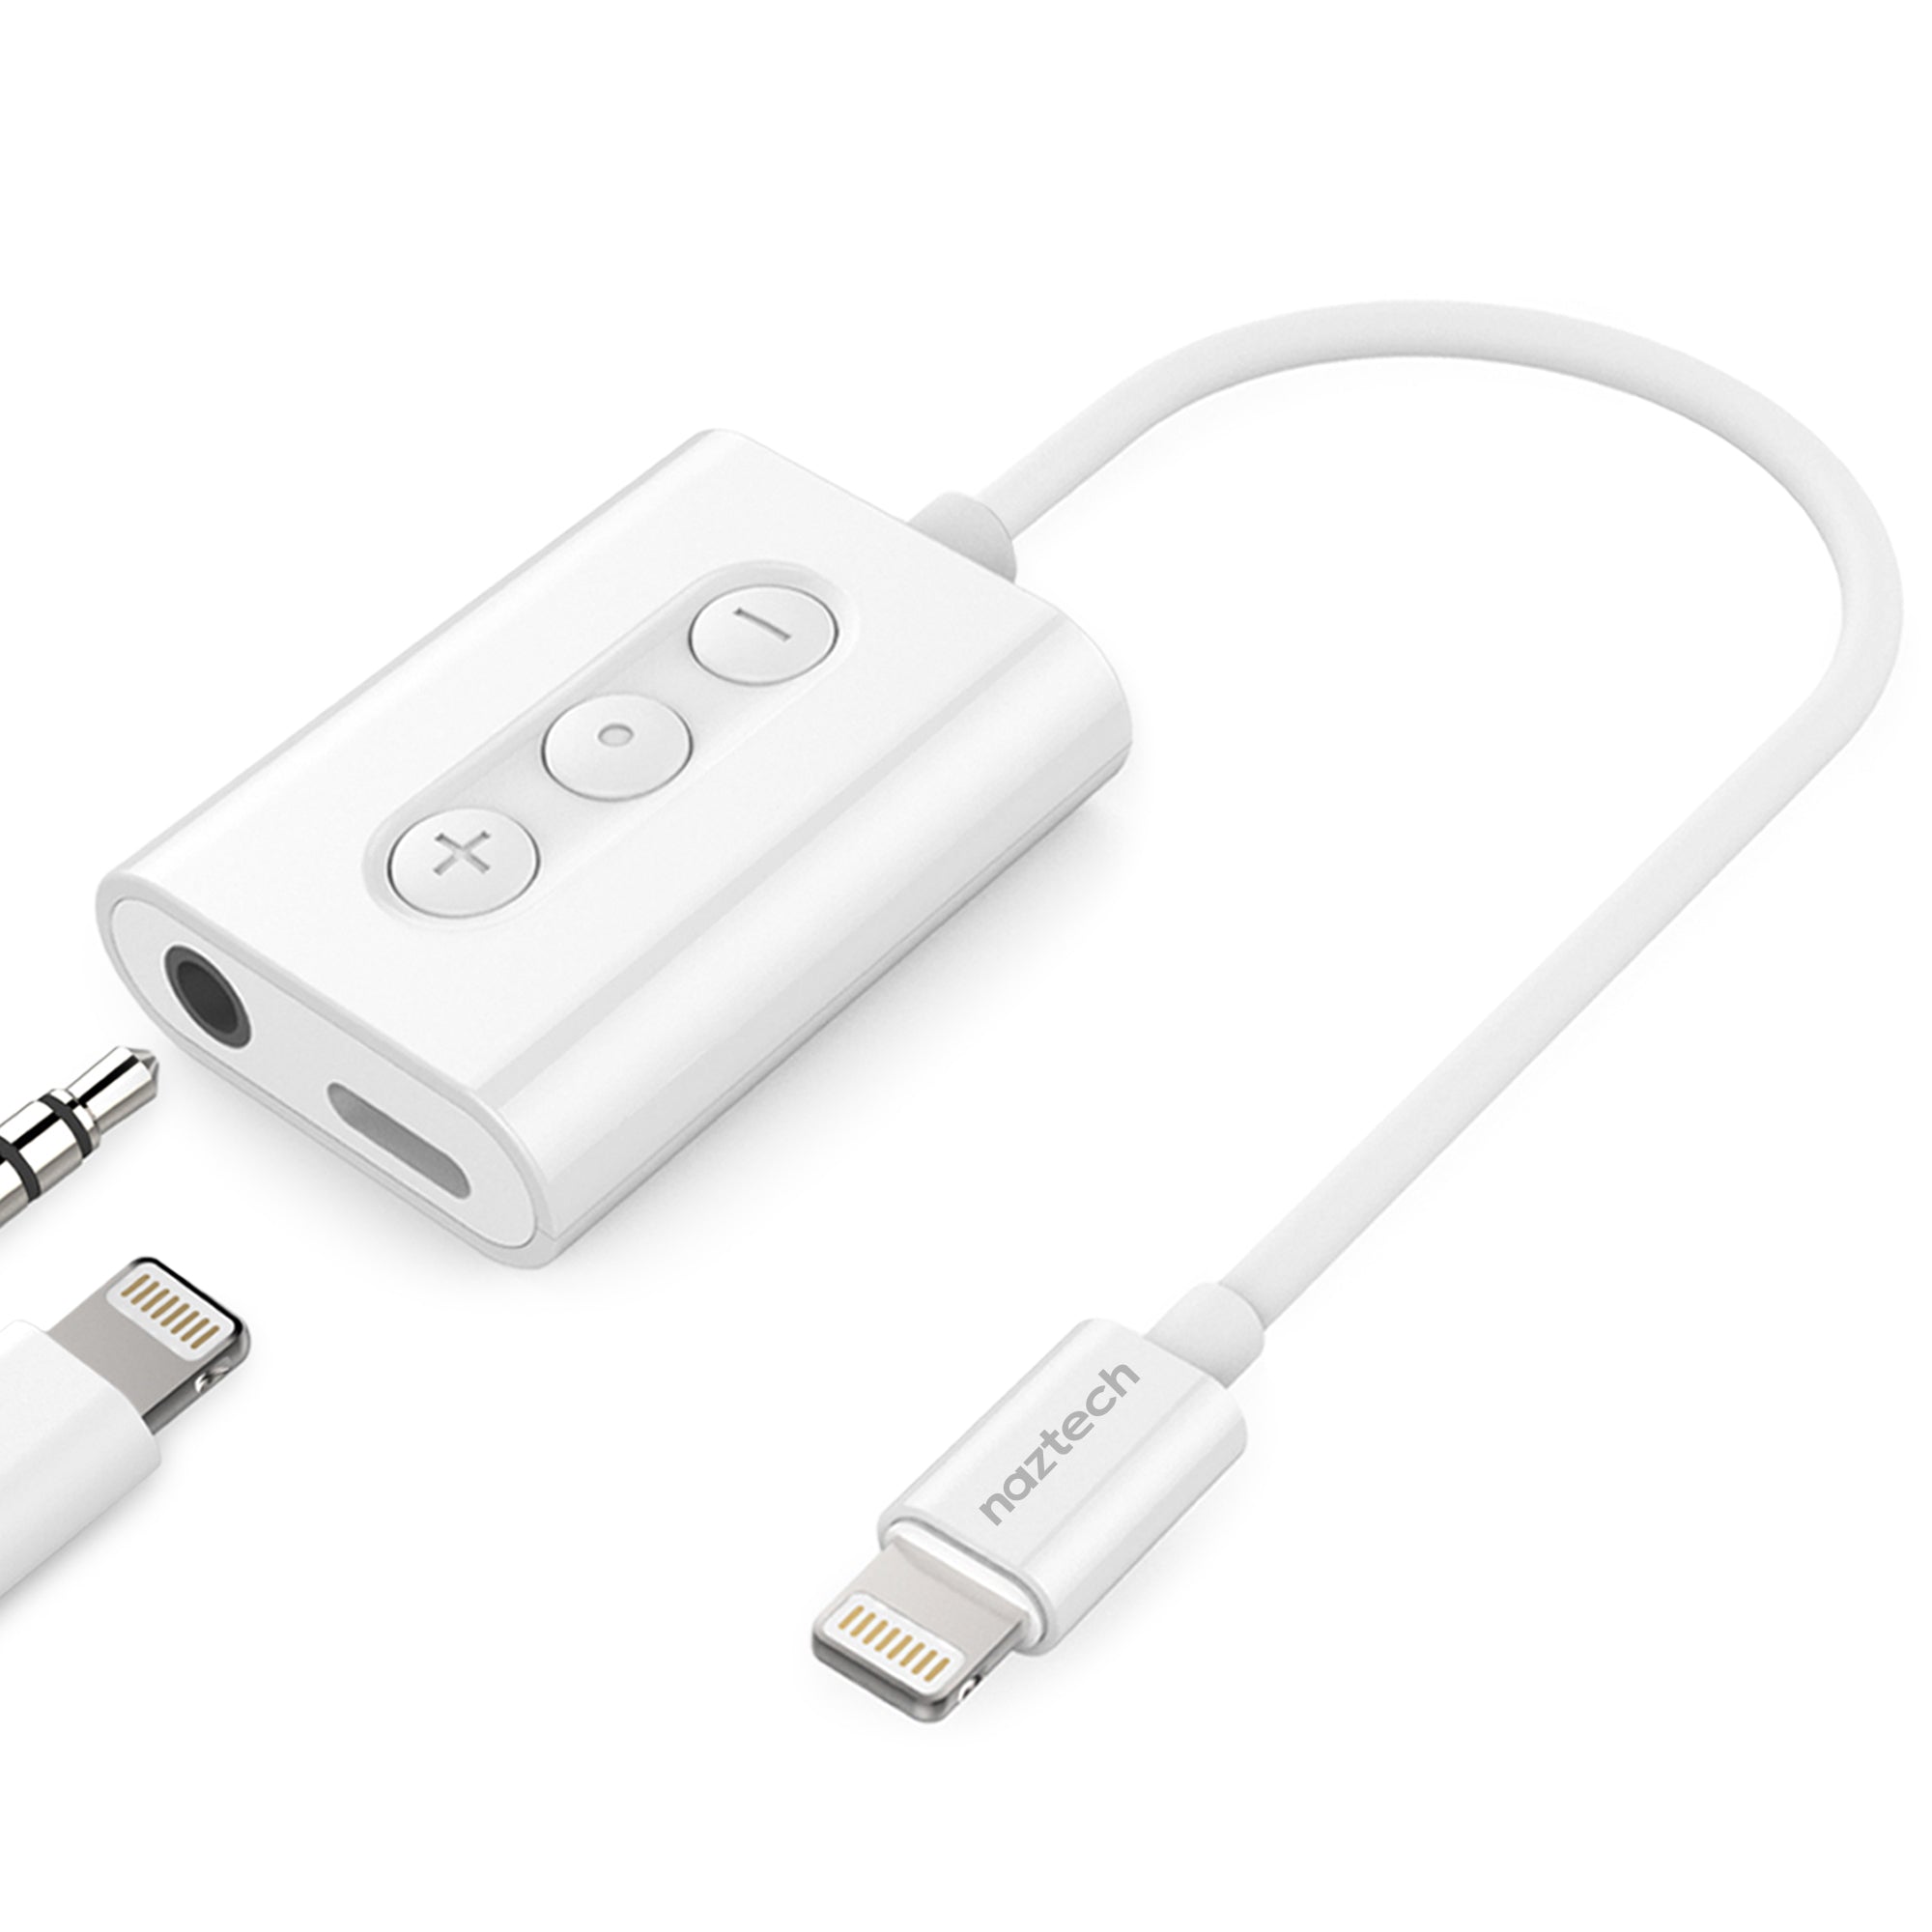 iPhone Adapter for AUX Charger, 2 in 1 Lightning to 3.5mm iPhone